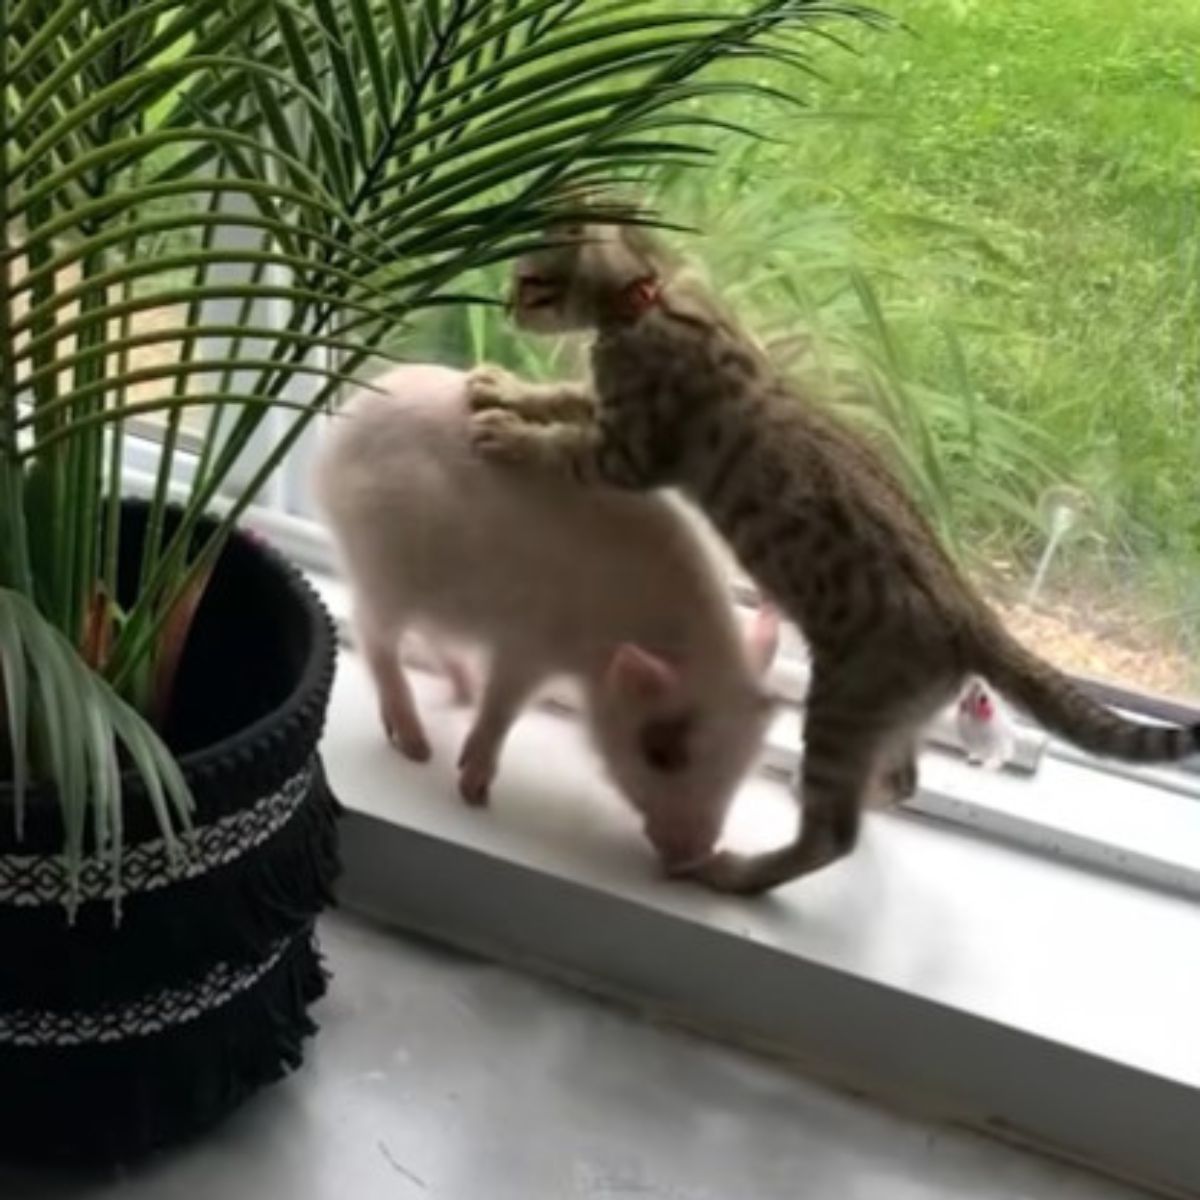 kitten and piglet playing by the window